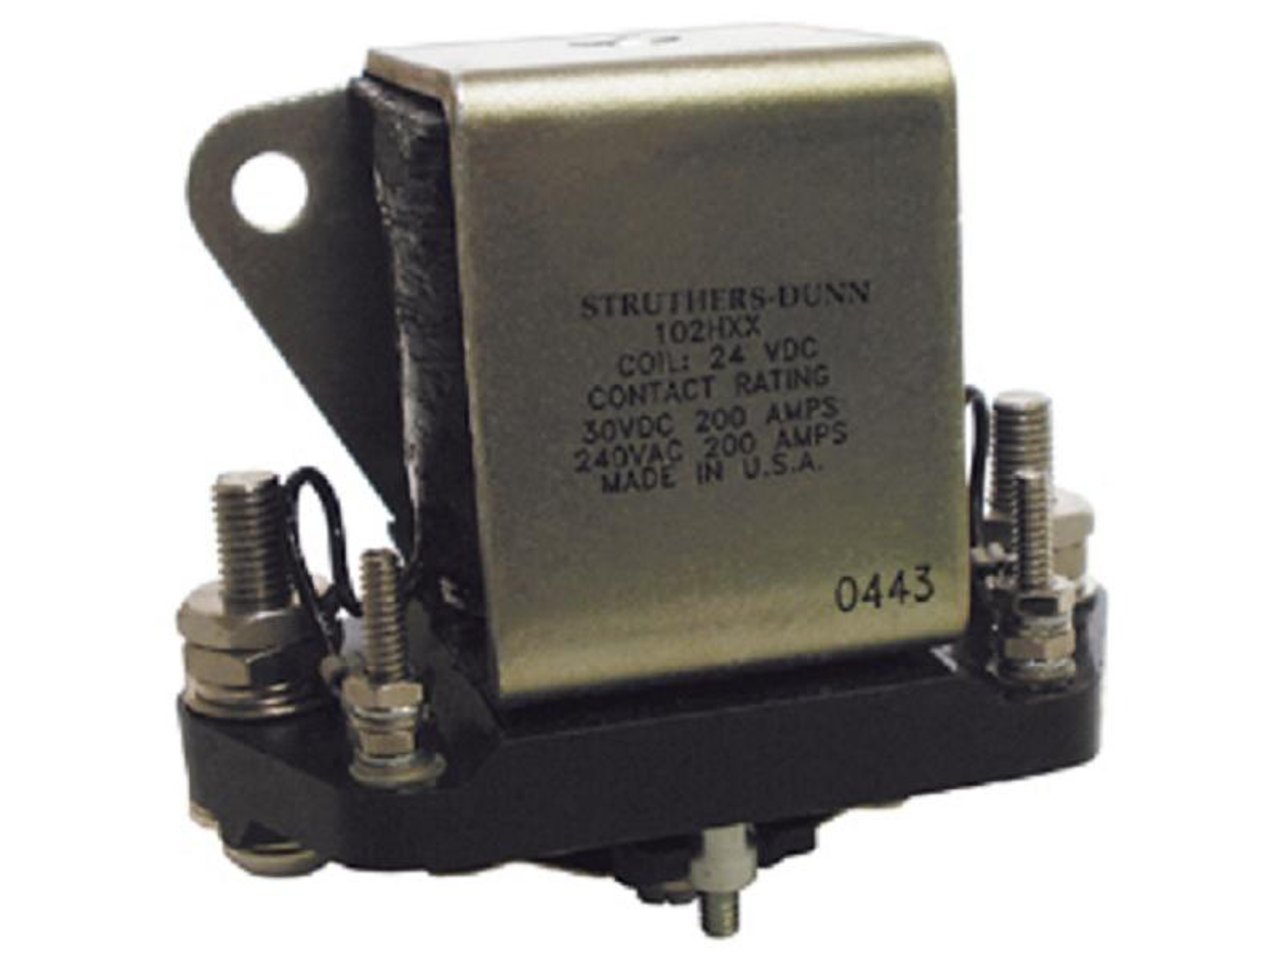 Struthers-Dunn 102HXX-28VDC Power Contactors